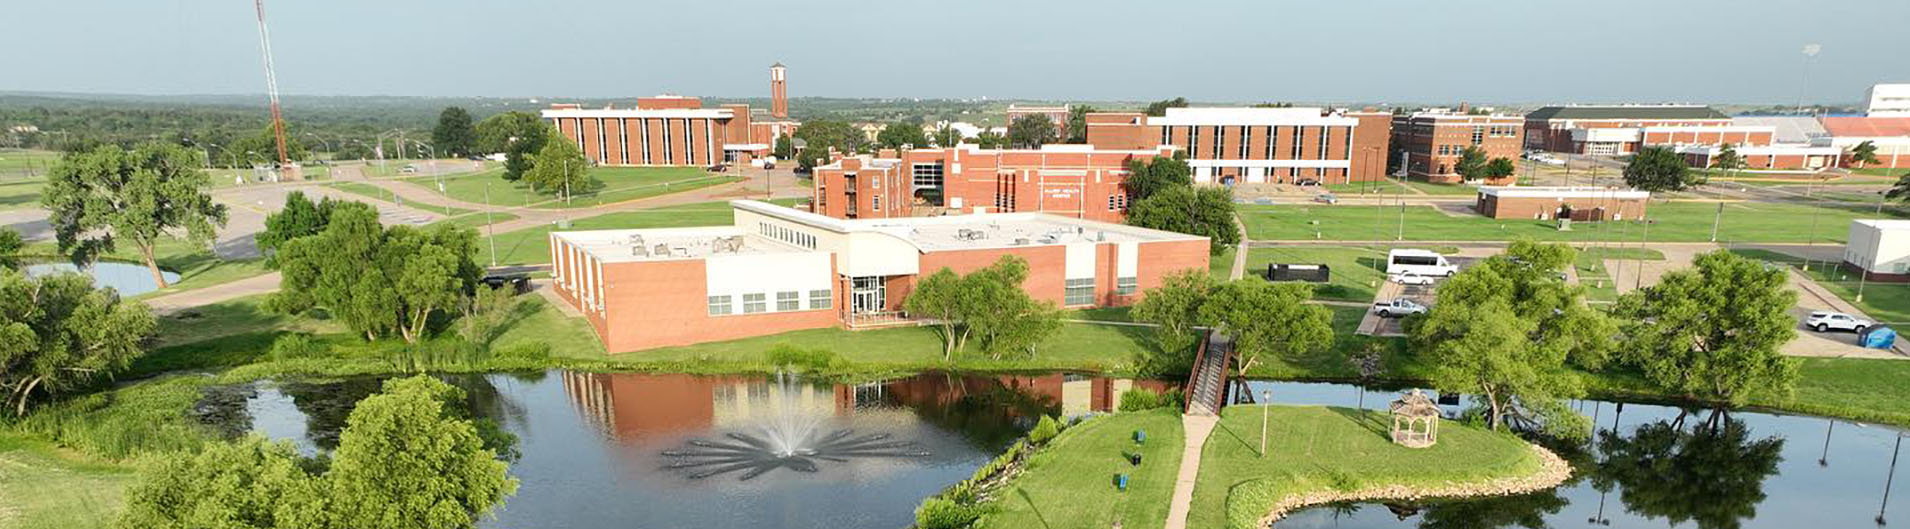 Photo of campus buildings in background and ponds and bridge in forefront